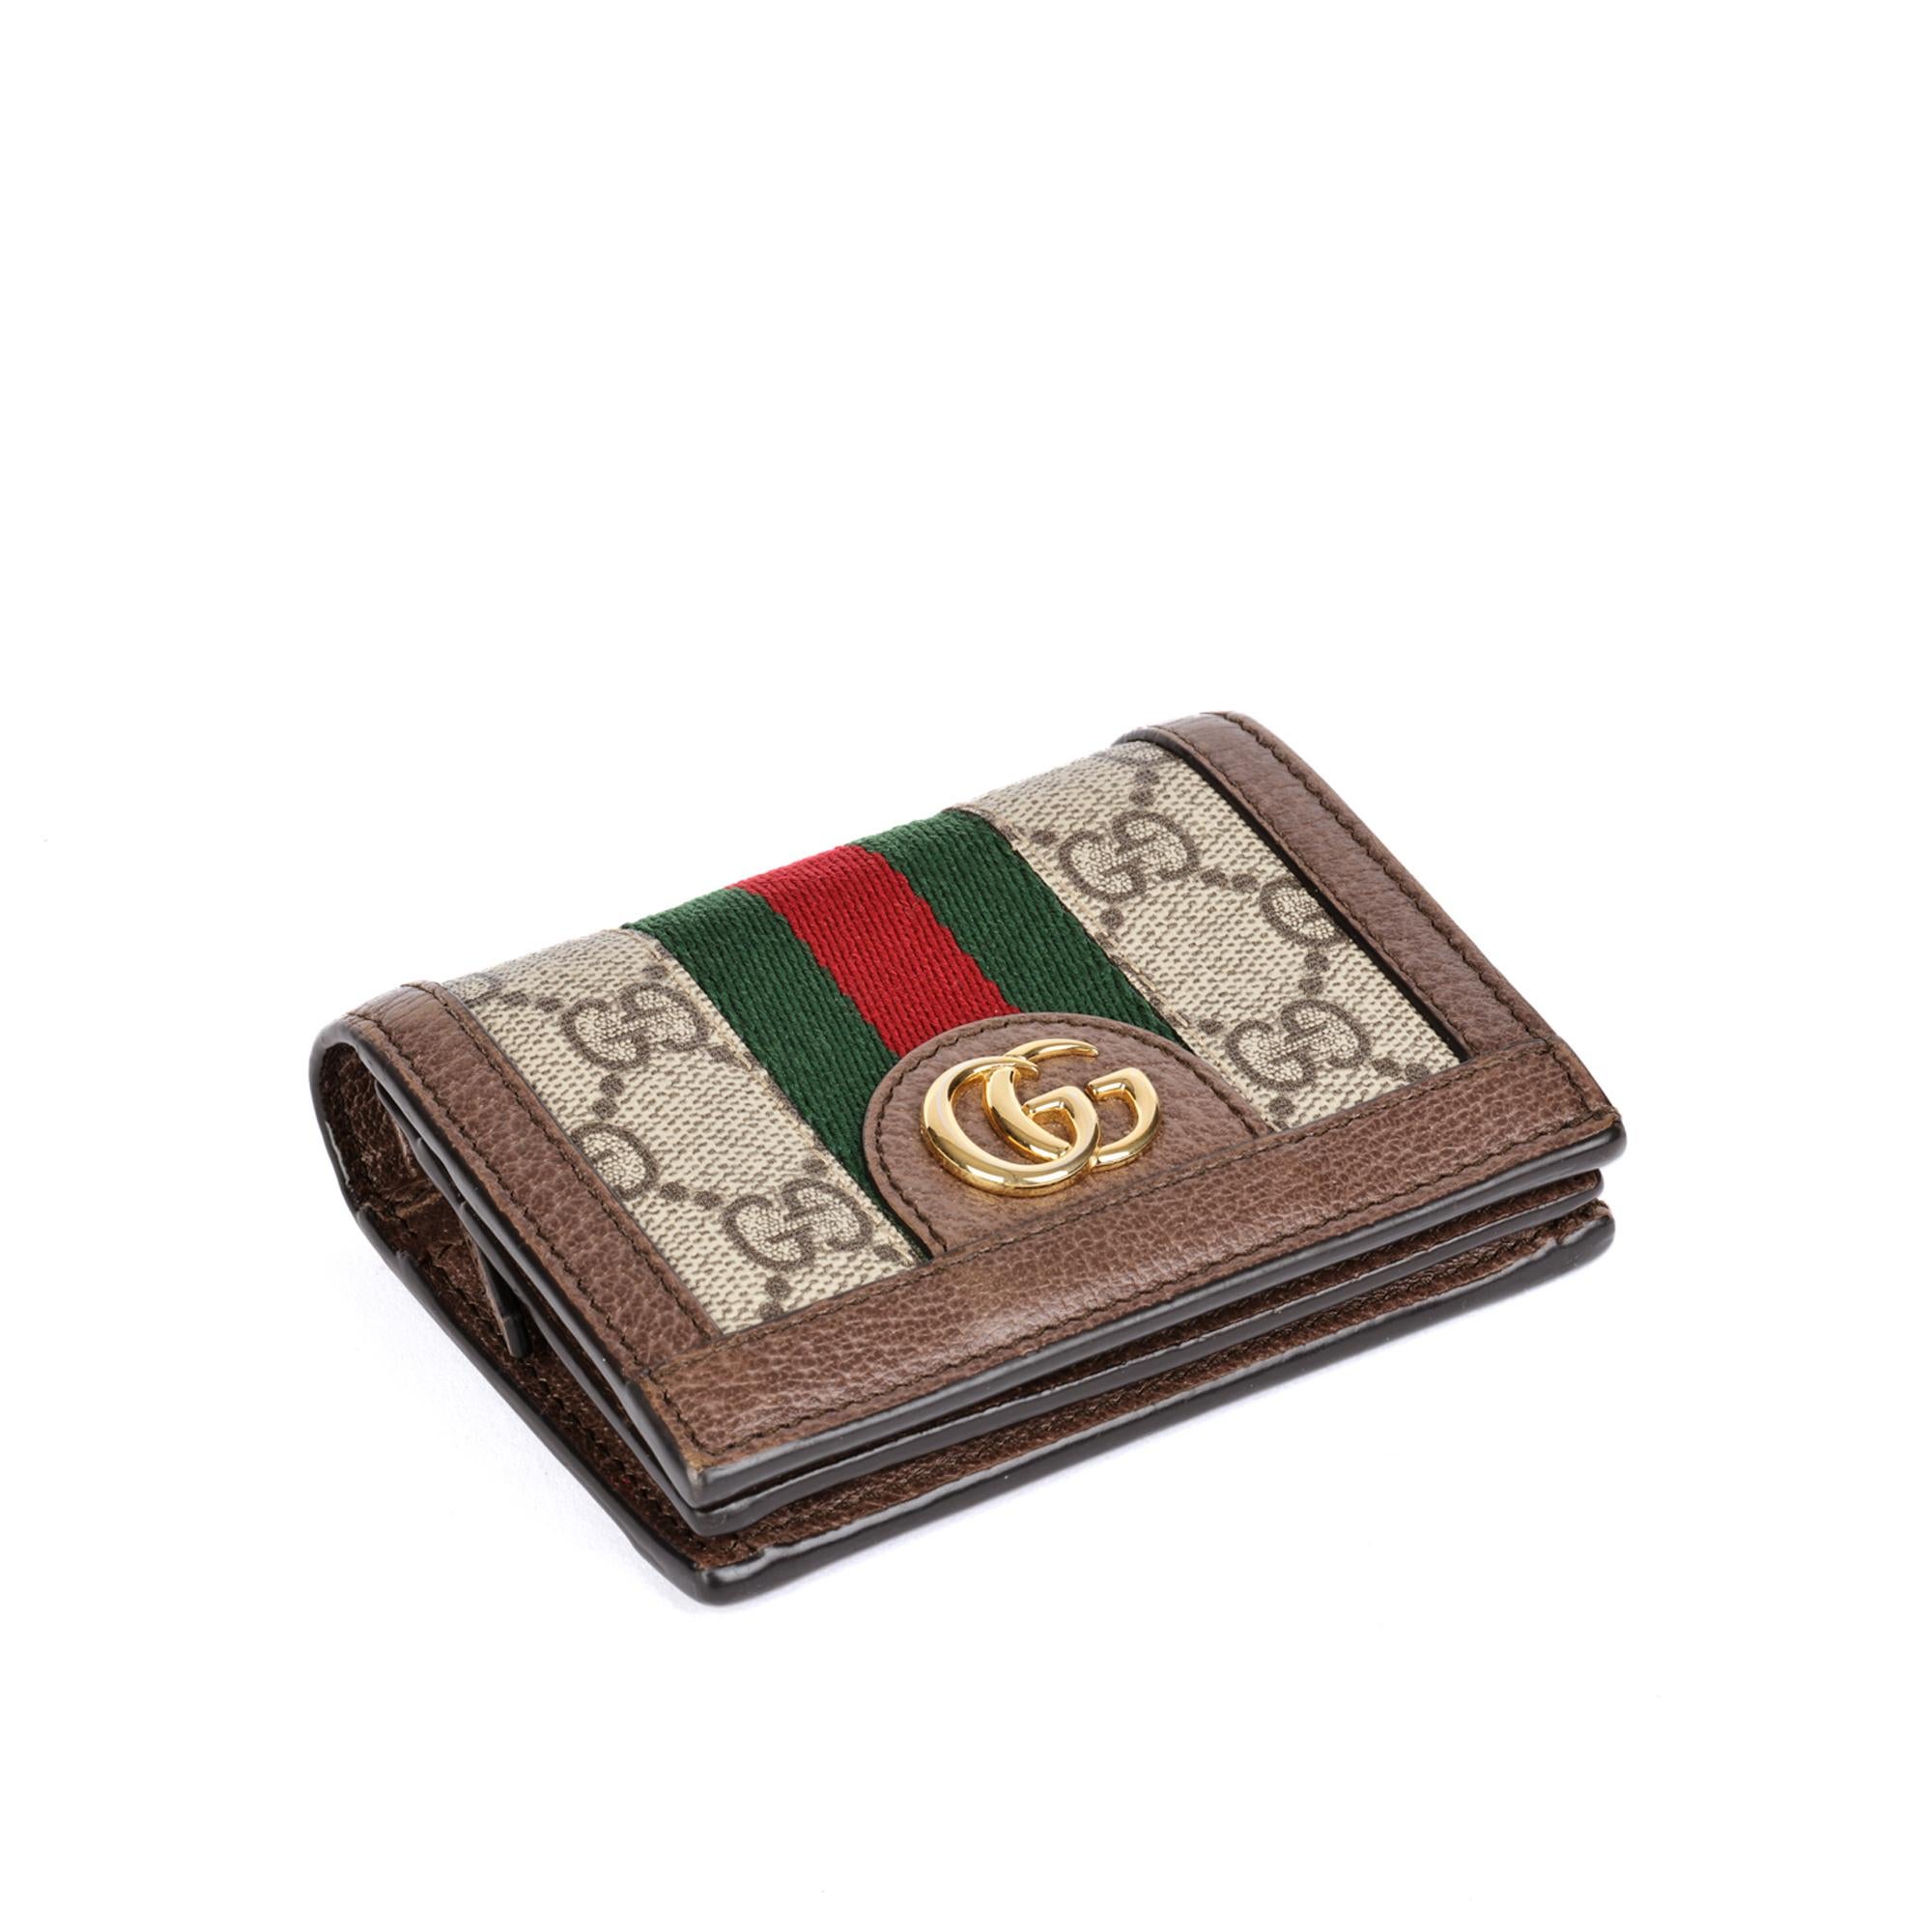 Gucci Beige, Ebony & Brown GG Supreme Canvas and Leather Ophidia GG Card Case Wallet

CONDITION NOTES
The exterior is excellent condition with light signs of use.
The interior is in excellent condition with light signs of use.
The hardware is in